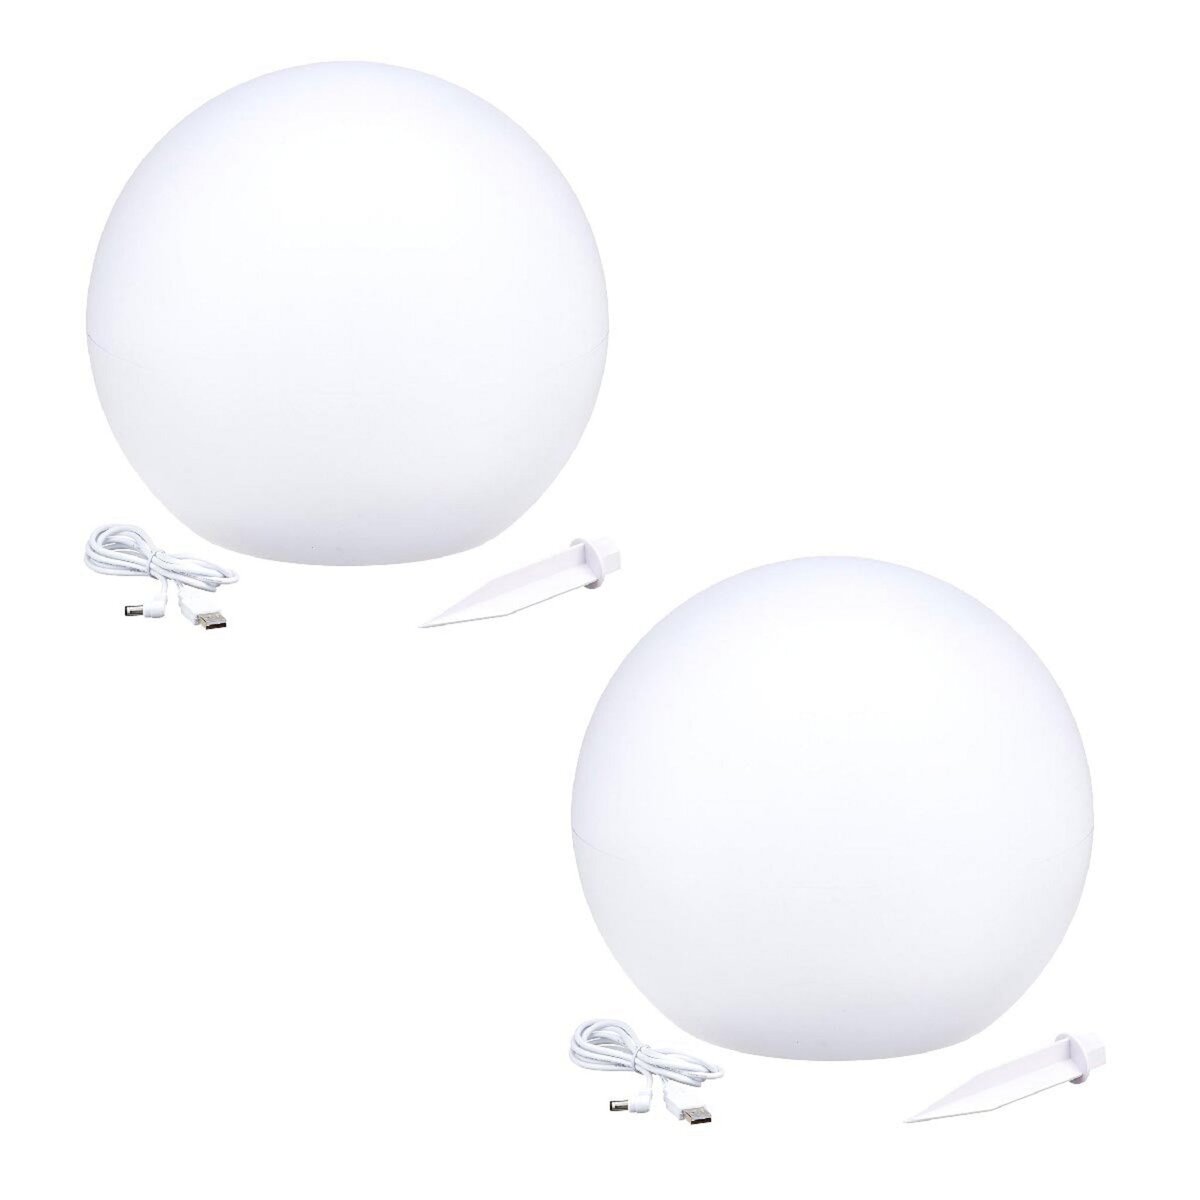 Boules lumineuses solaires